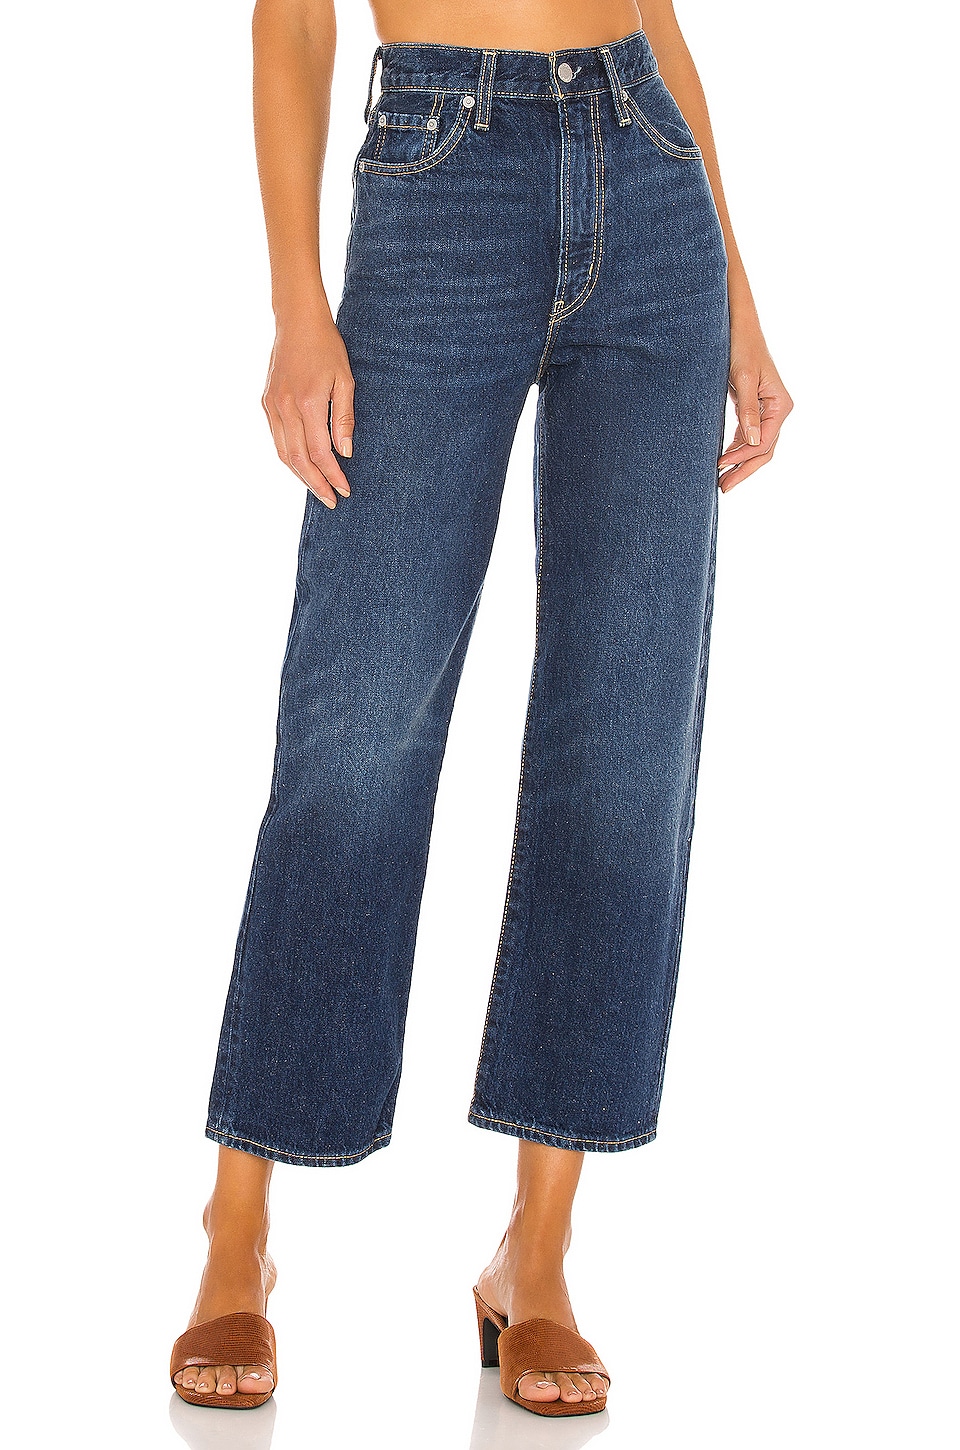 LEVI'S Wellthread Ribcage Ankle Jean in Ground Swell | REVOLVE